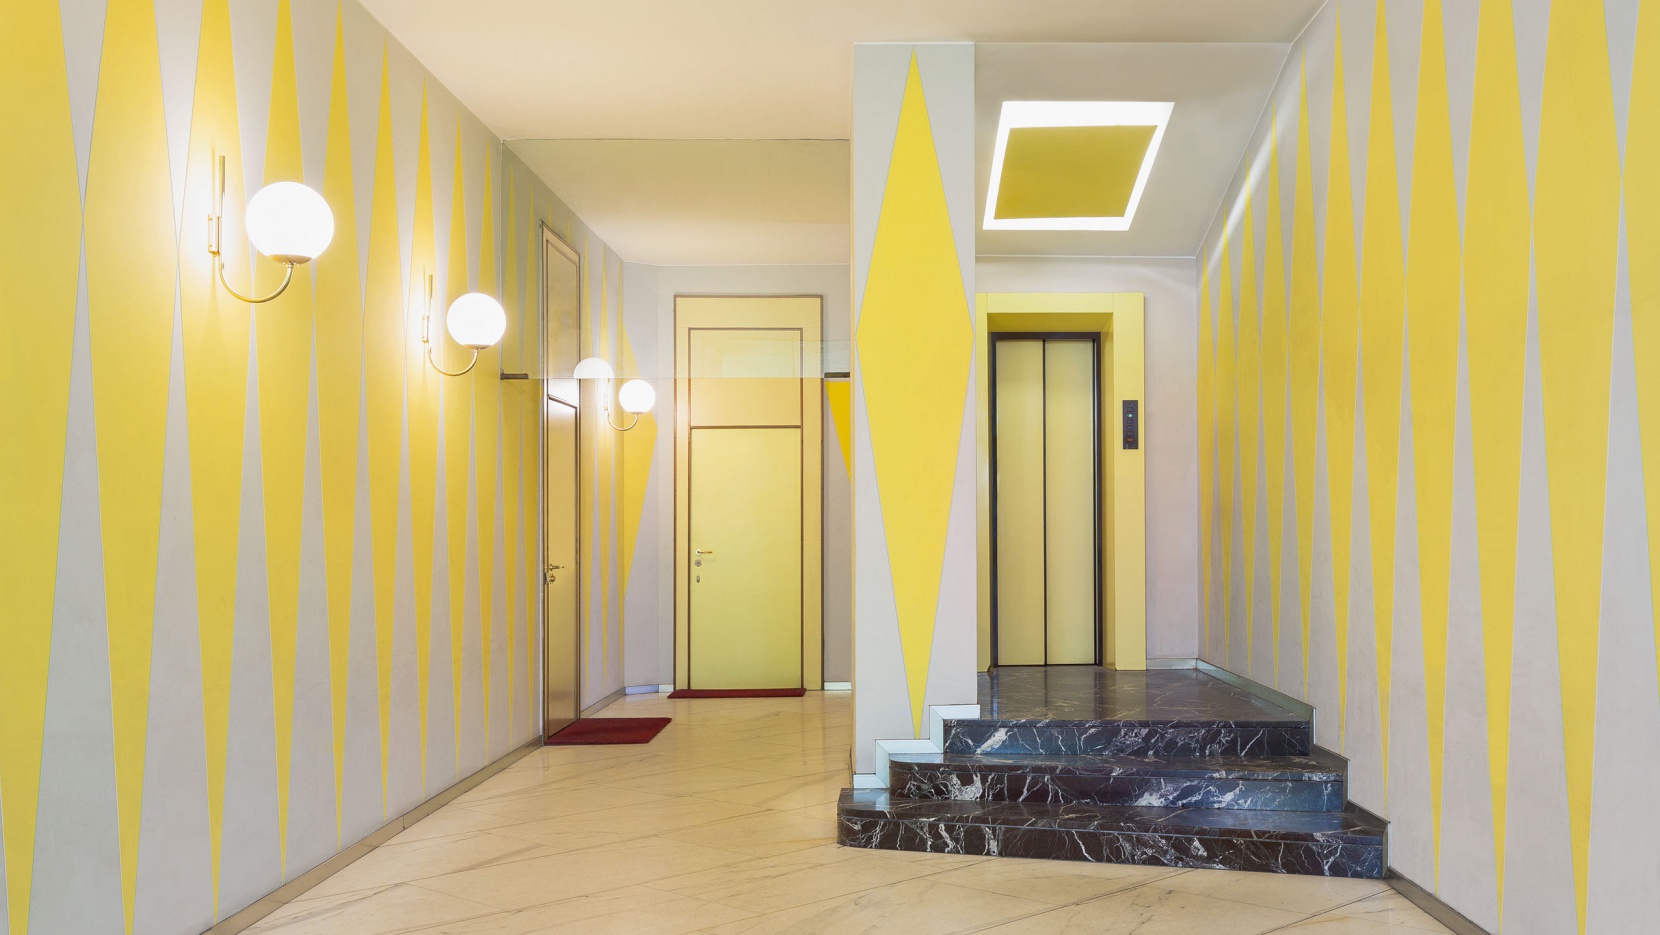 Making An Entrance A Visual Tour Of Milan S Splendid Entryways By